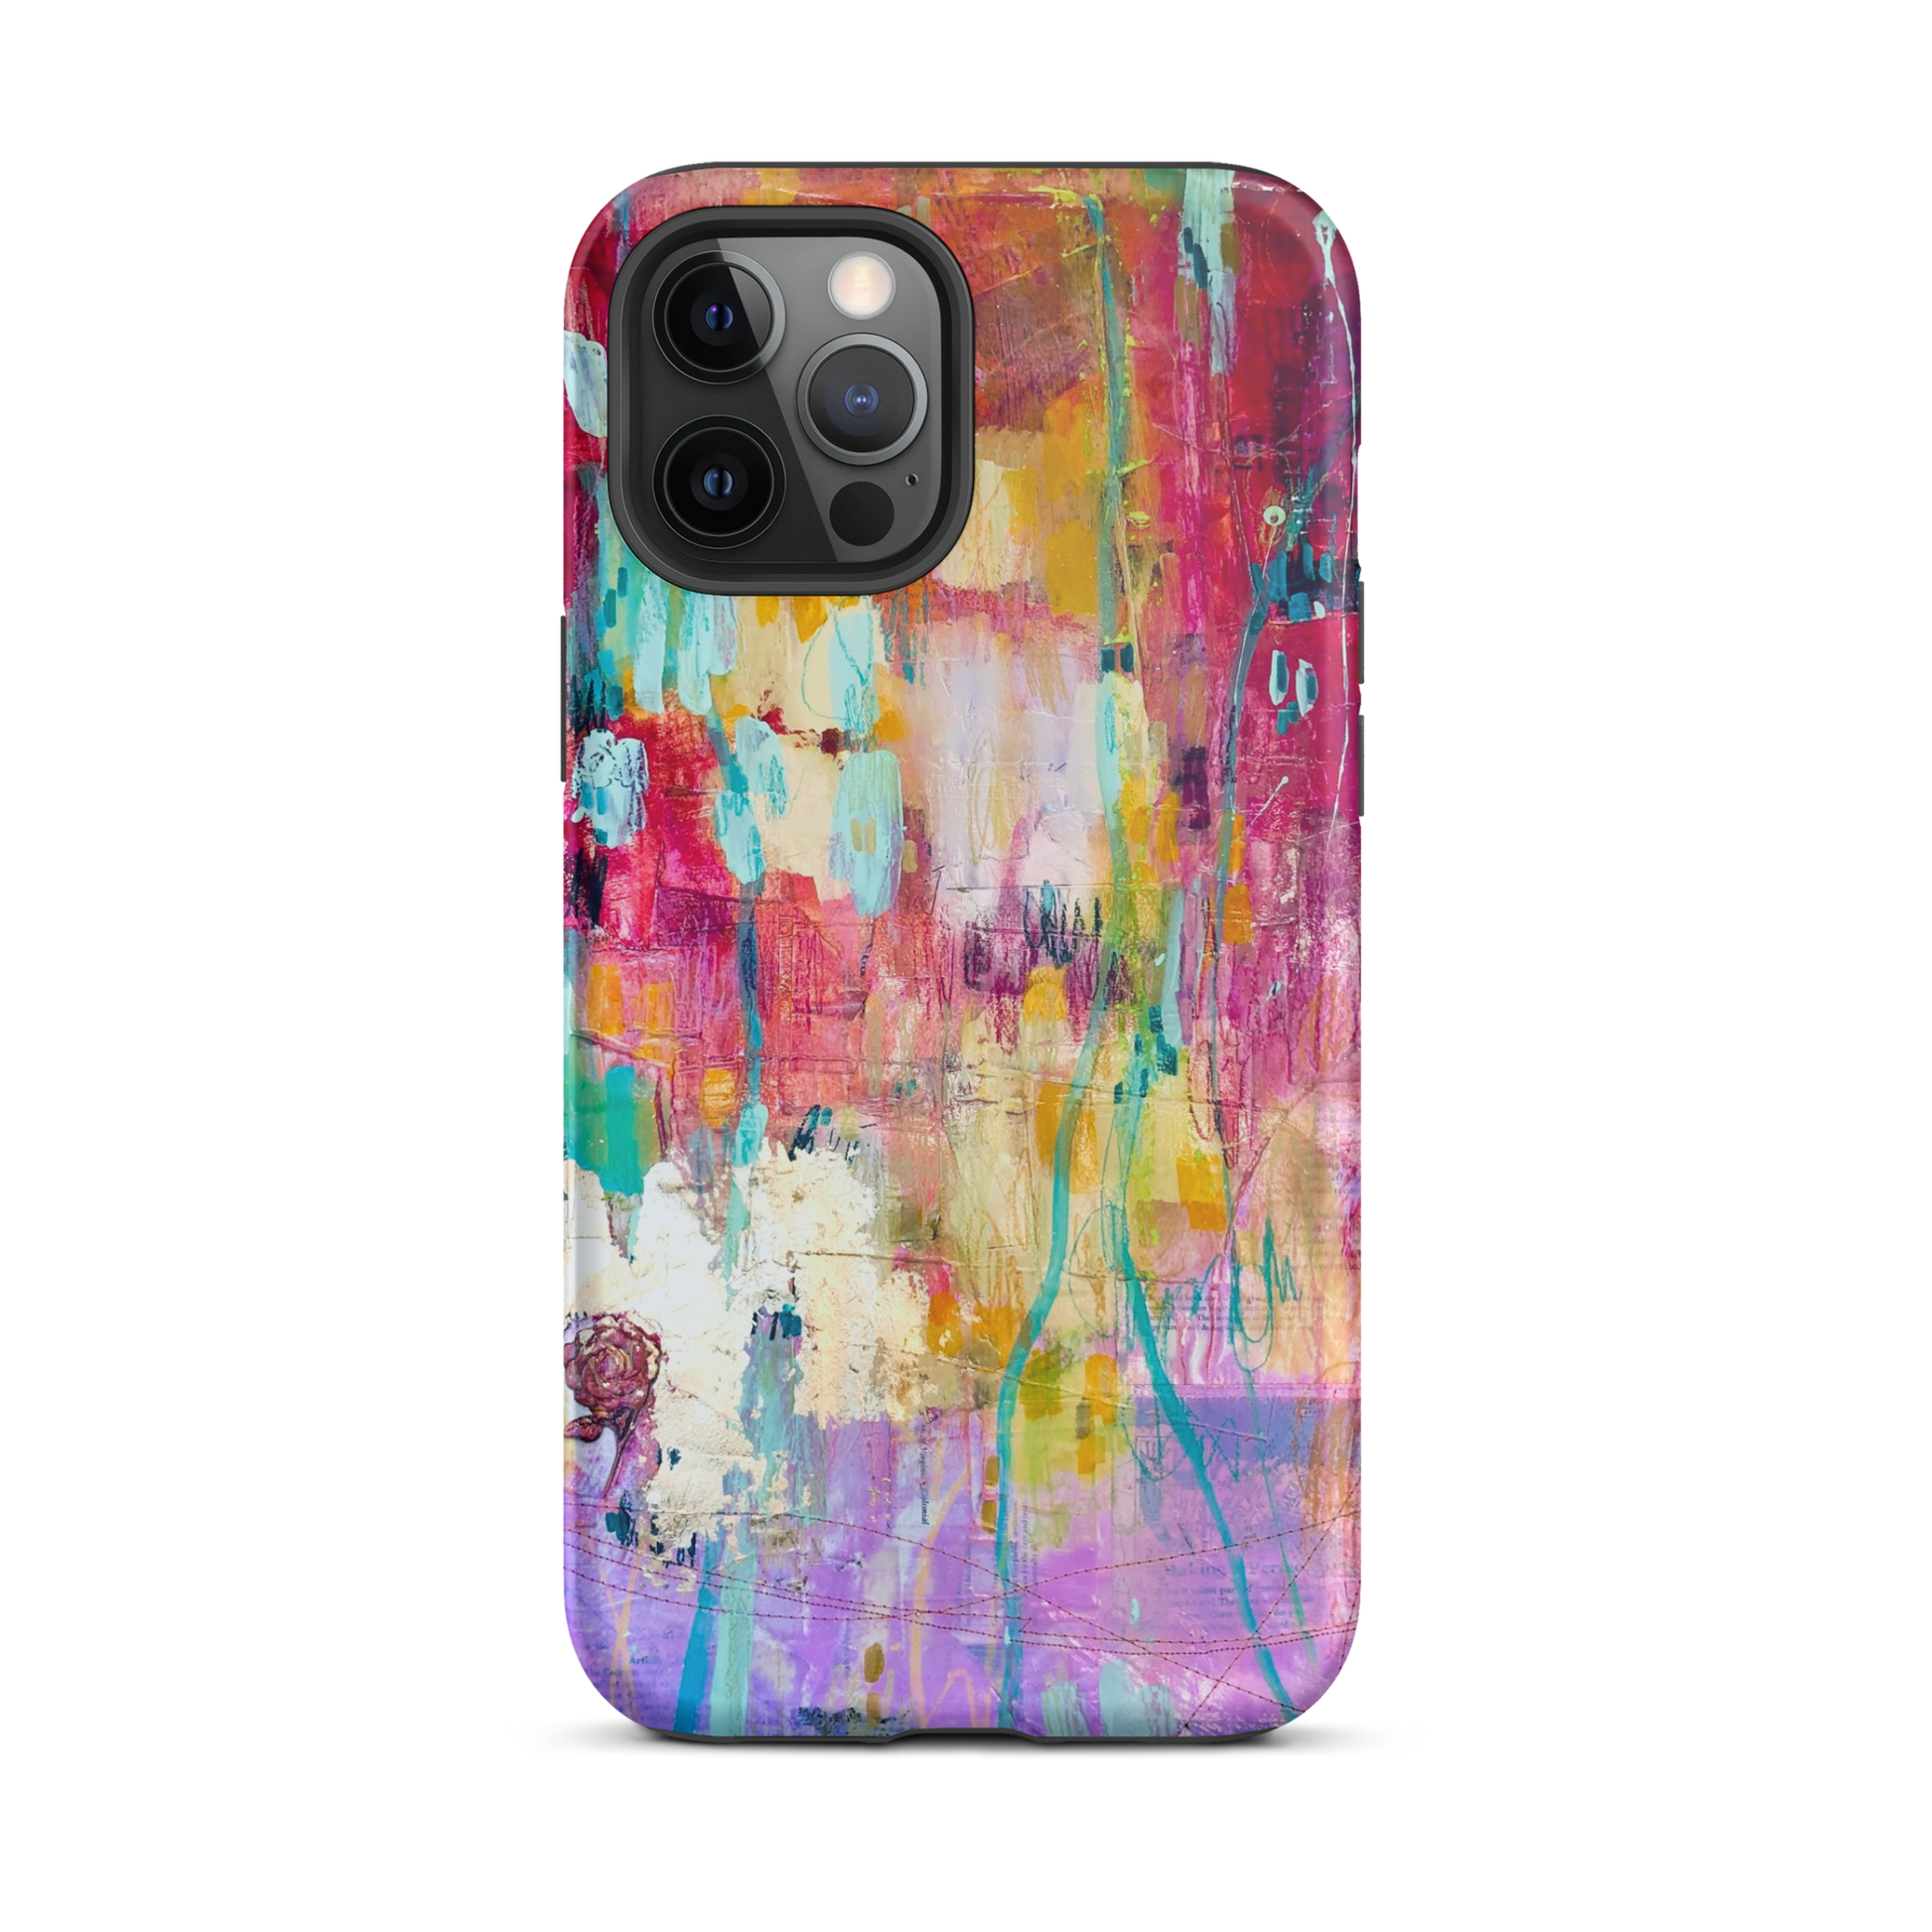 My Muses - Tough iPhone case